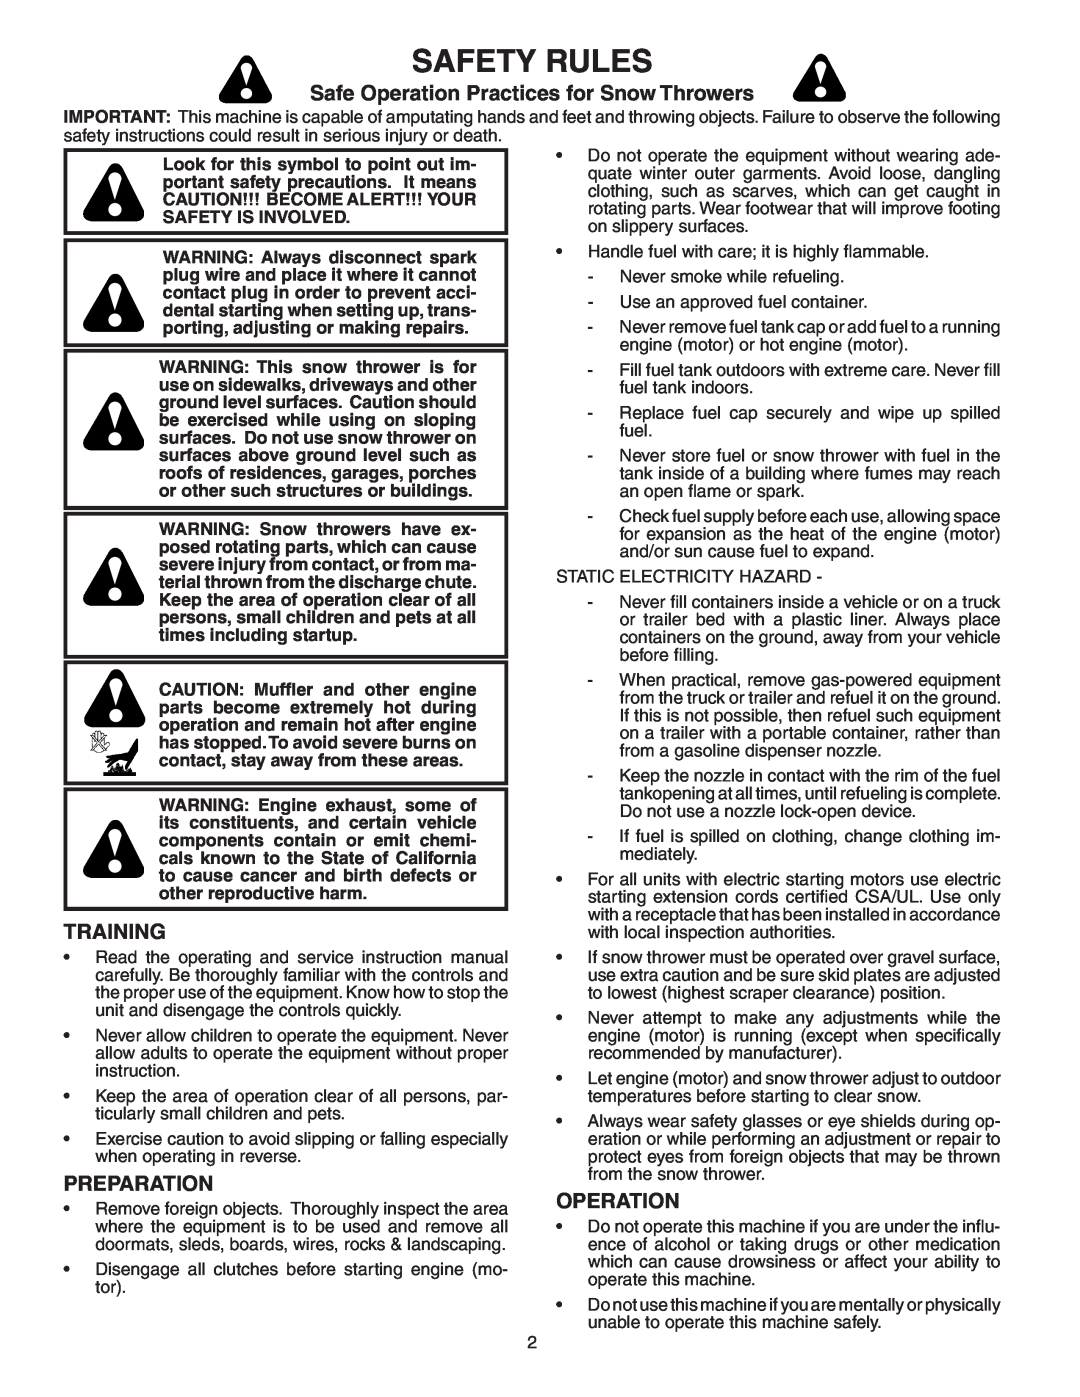 Poulan 189539 owner manual Safety Rules, Safe Operation Practices for Snow Throwers, Training, Preparation 